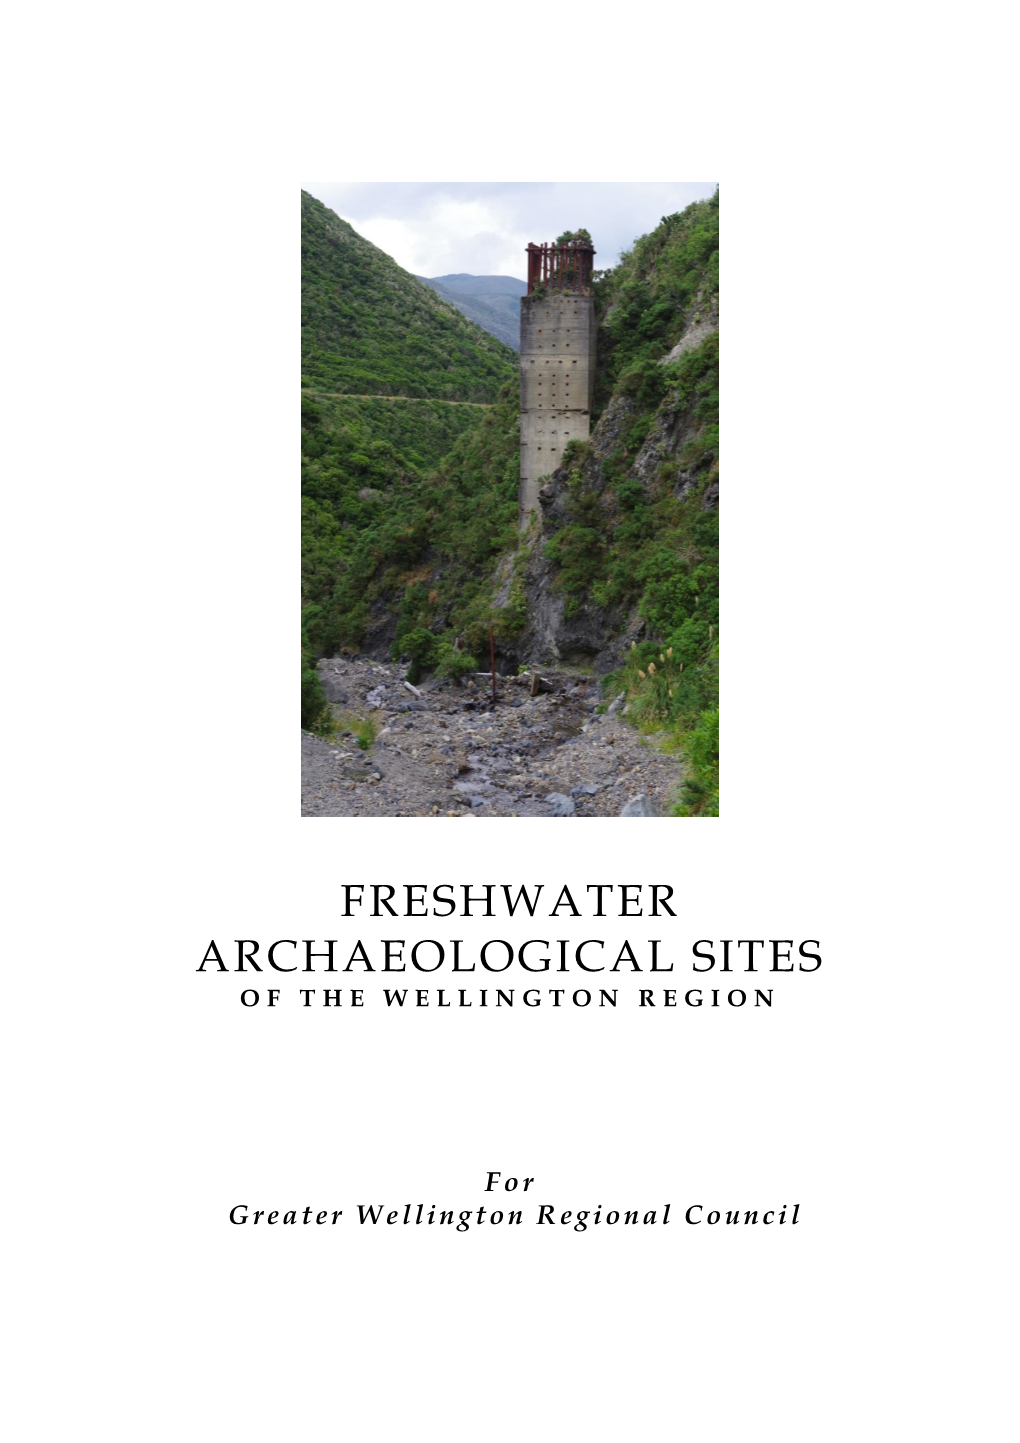 Freshwater Archaeological Sites of the Wellington Region